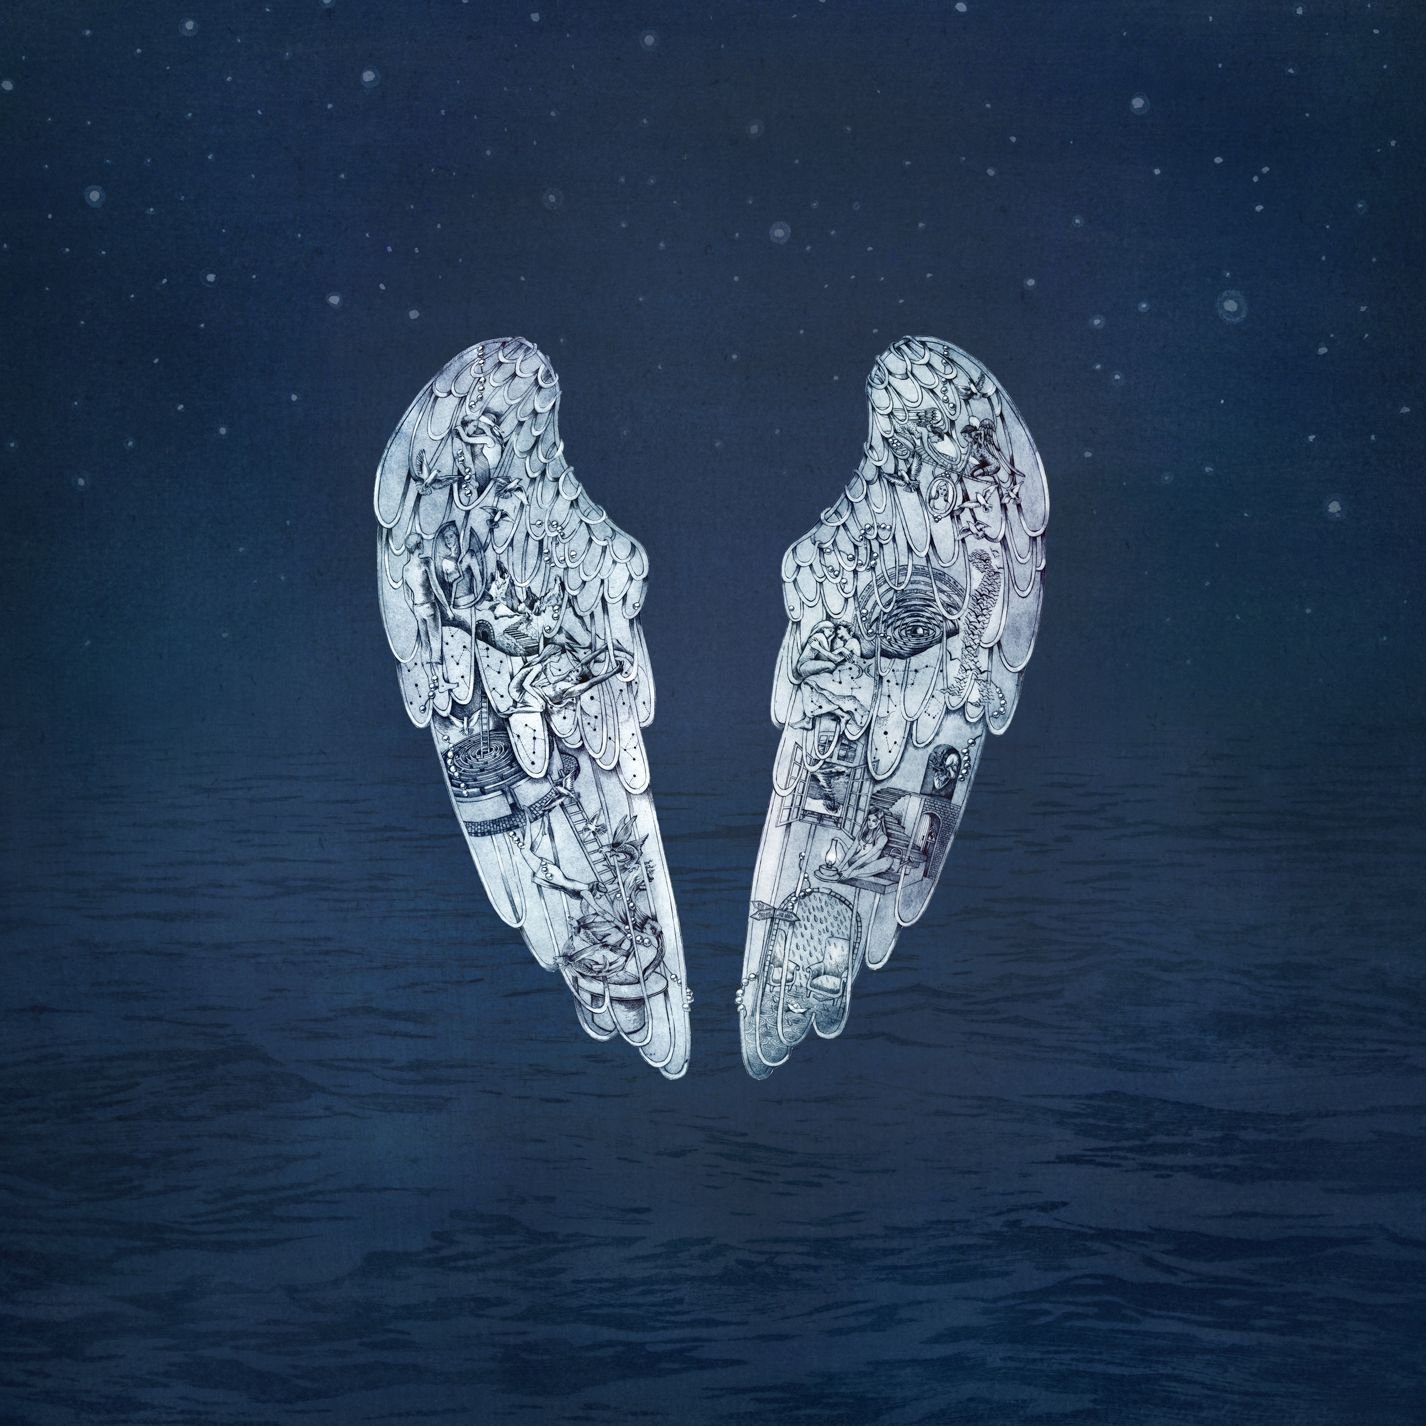 boom music reviews - Ghost Stories by Coldplay